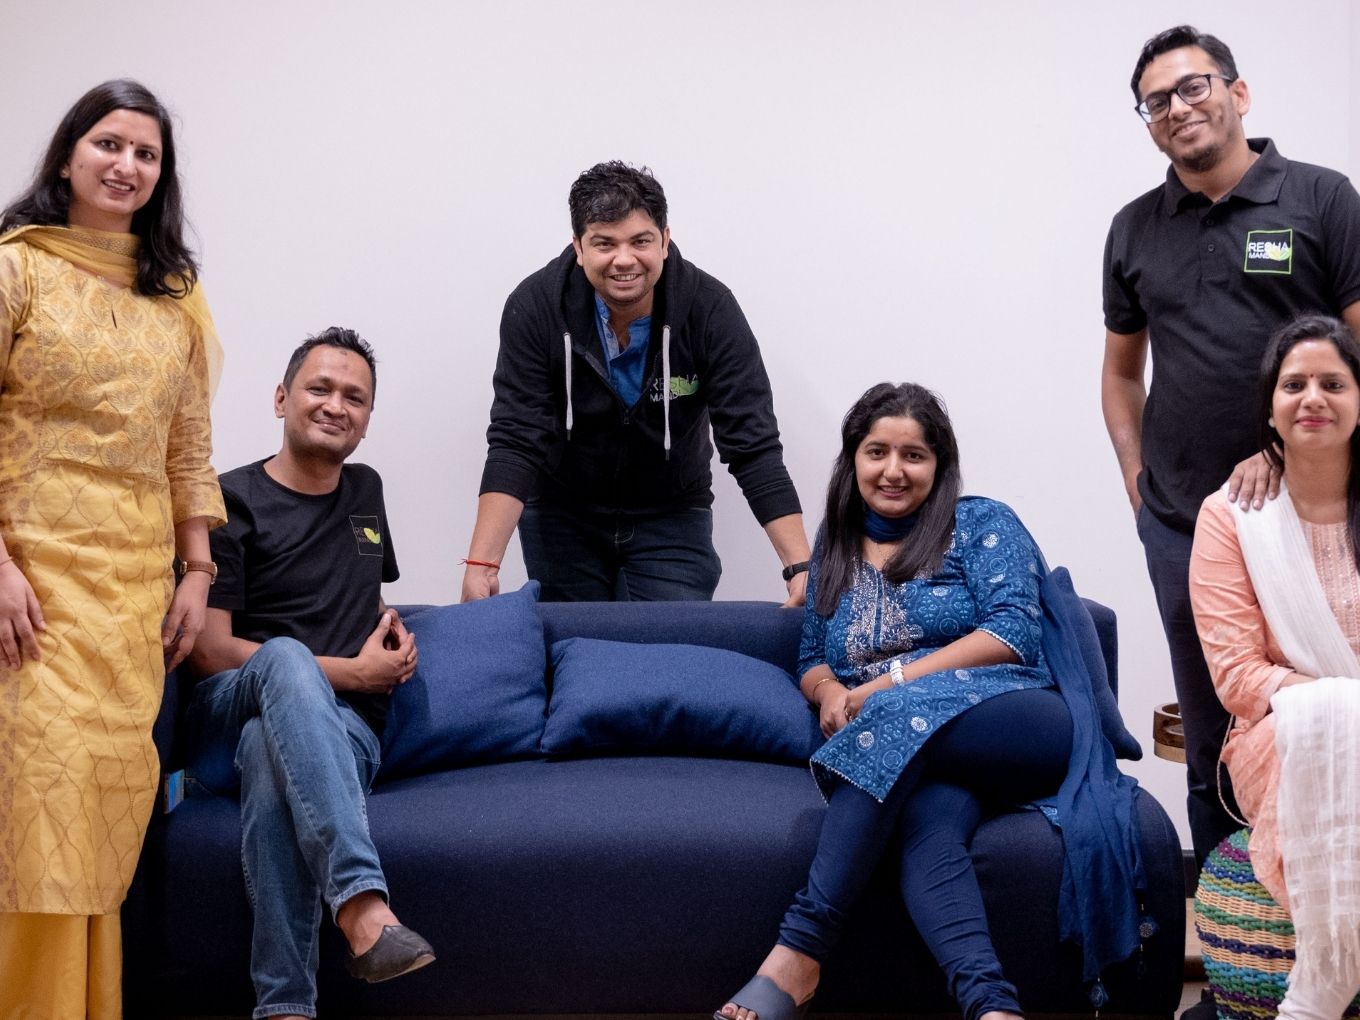 At the helm, (l-r) Sheelu Agarwal with husband Saurabh Agarwal, Chief Technology Officer, Mayank Tiwari, CEO with his wife Natasha Tiwari and Utkarsh Apoorva, Co-founder and CBO with his wife Monica Apo